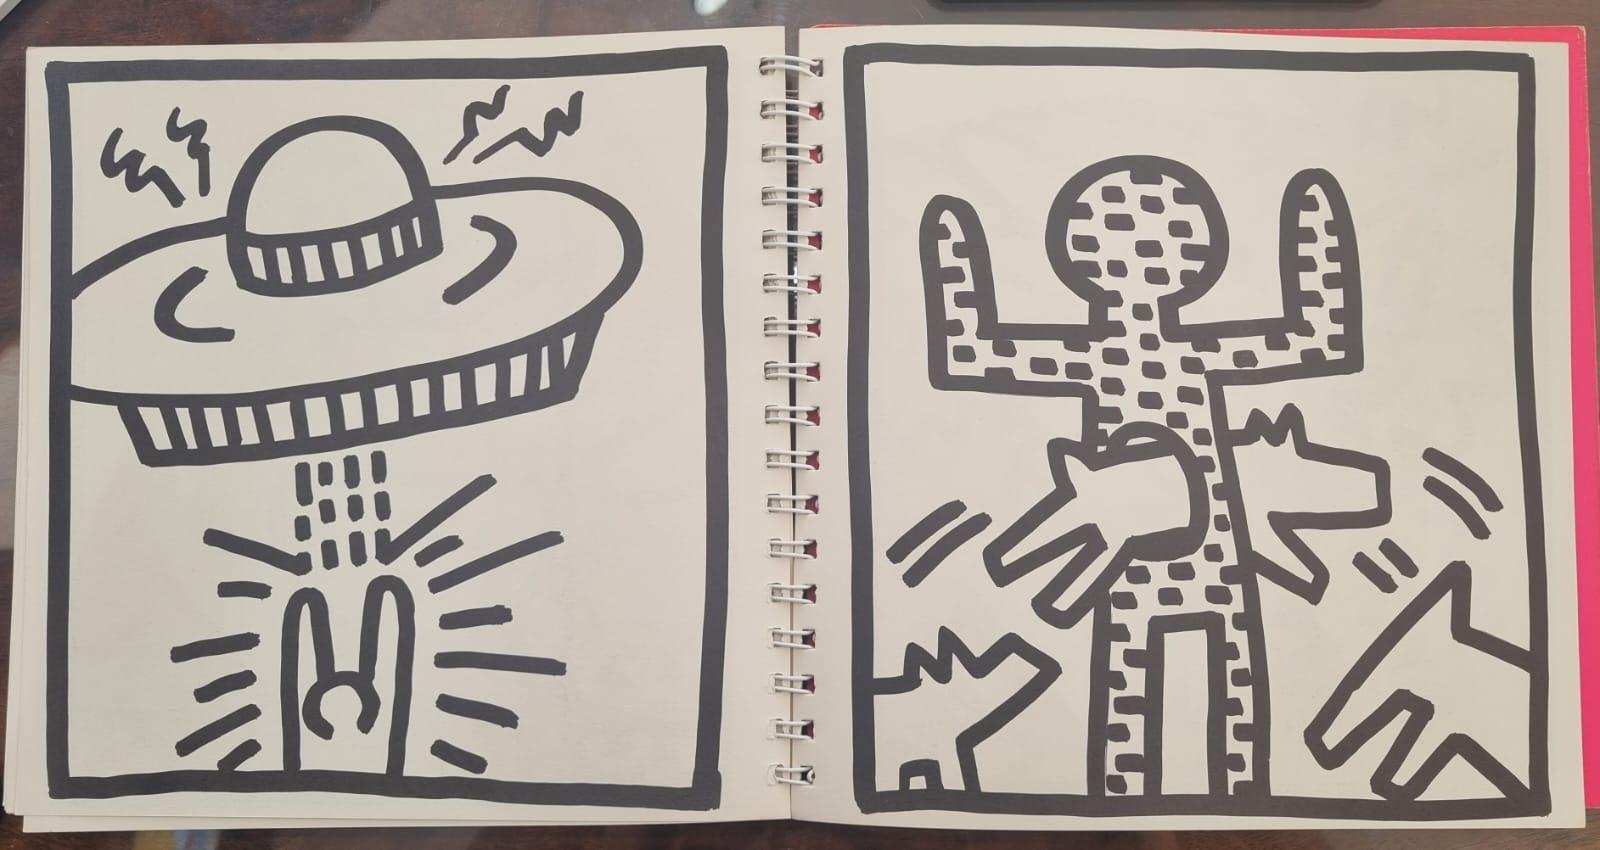 A wonderful drawing by Keith Haring on the first page of a catalog of his artworks exhibition. printed by Tony Shafrazi Gallery, New York, 1982
Signed lower right. Hand signed Marker on the exhibition catalogue by the artist and include a small